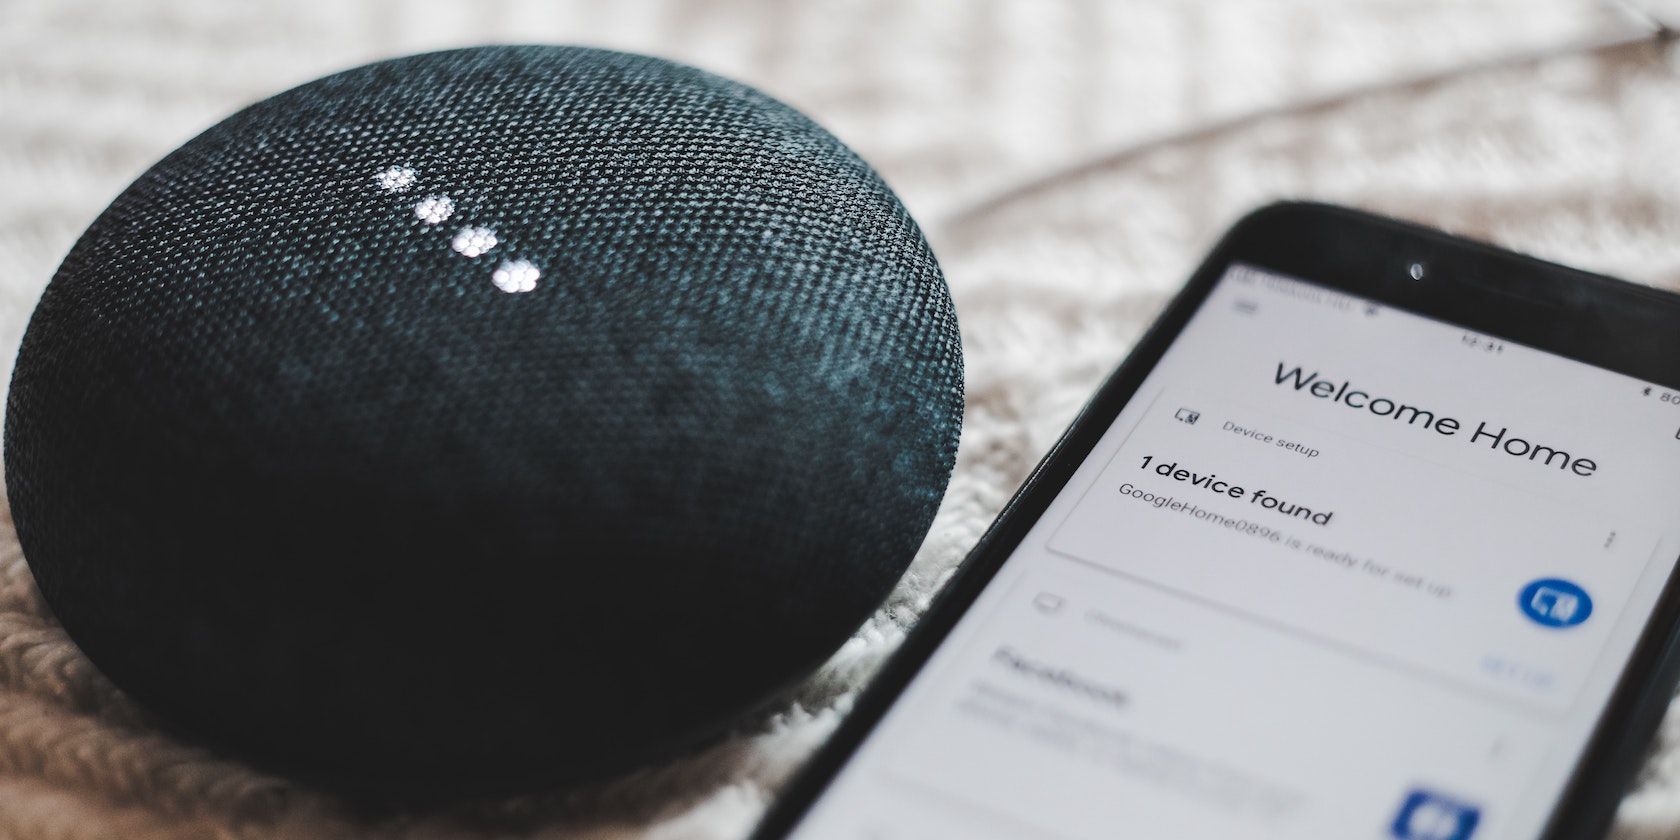 How to Turn Off Google Assistant on Android, Chromebook, and Smart Devices